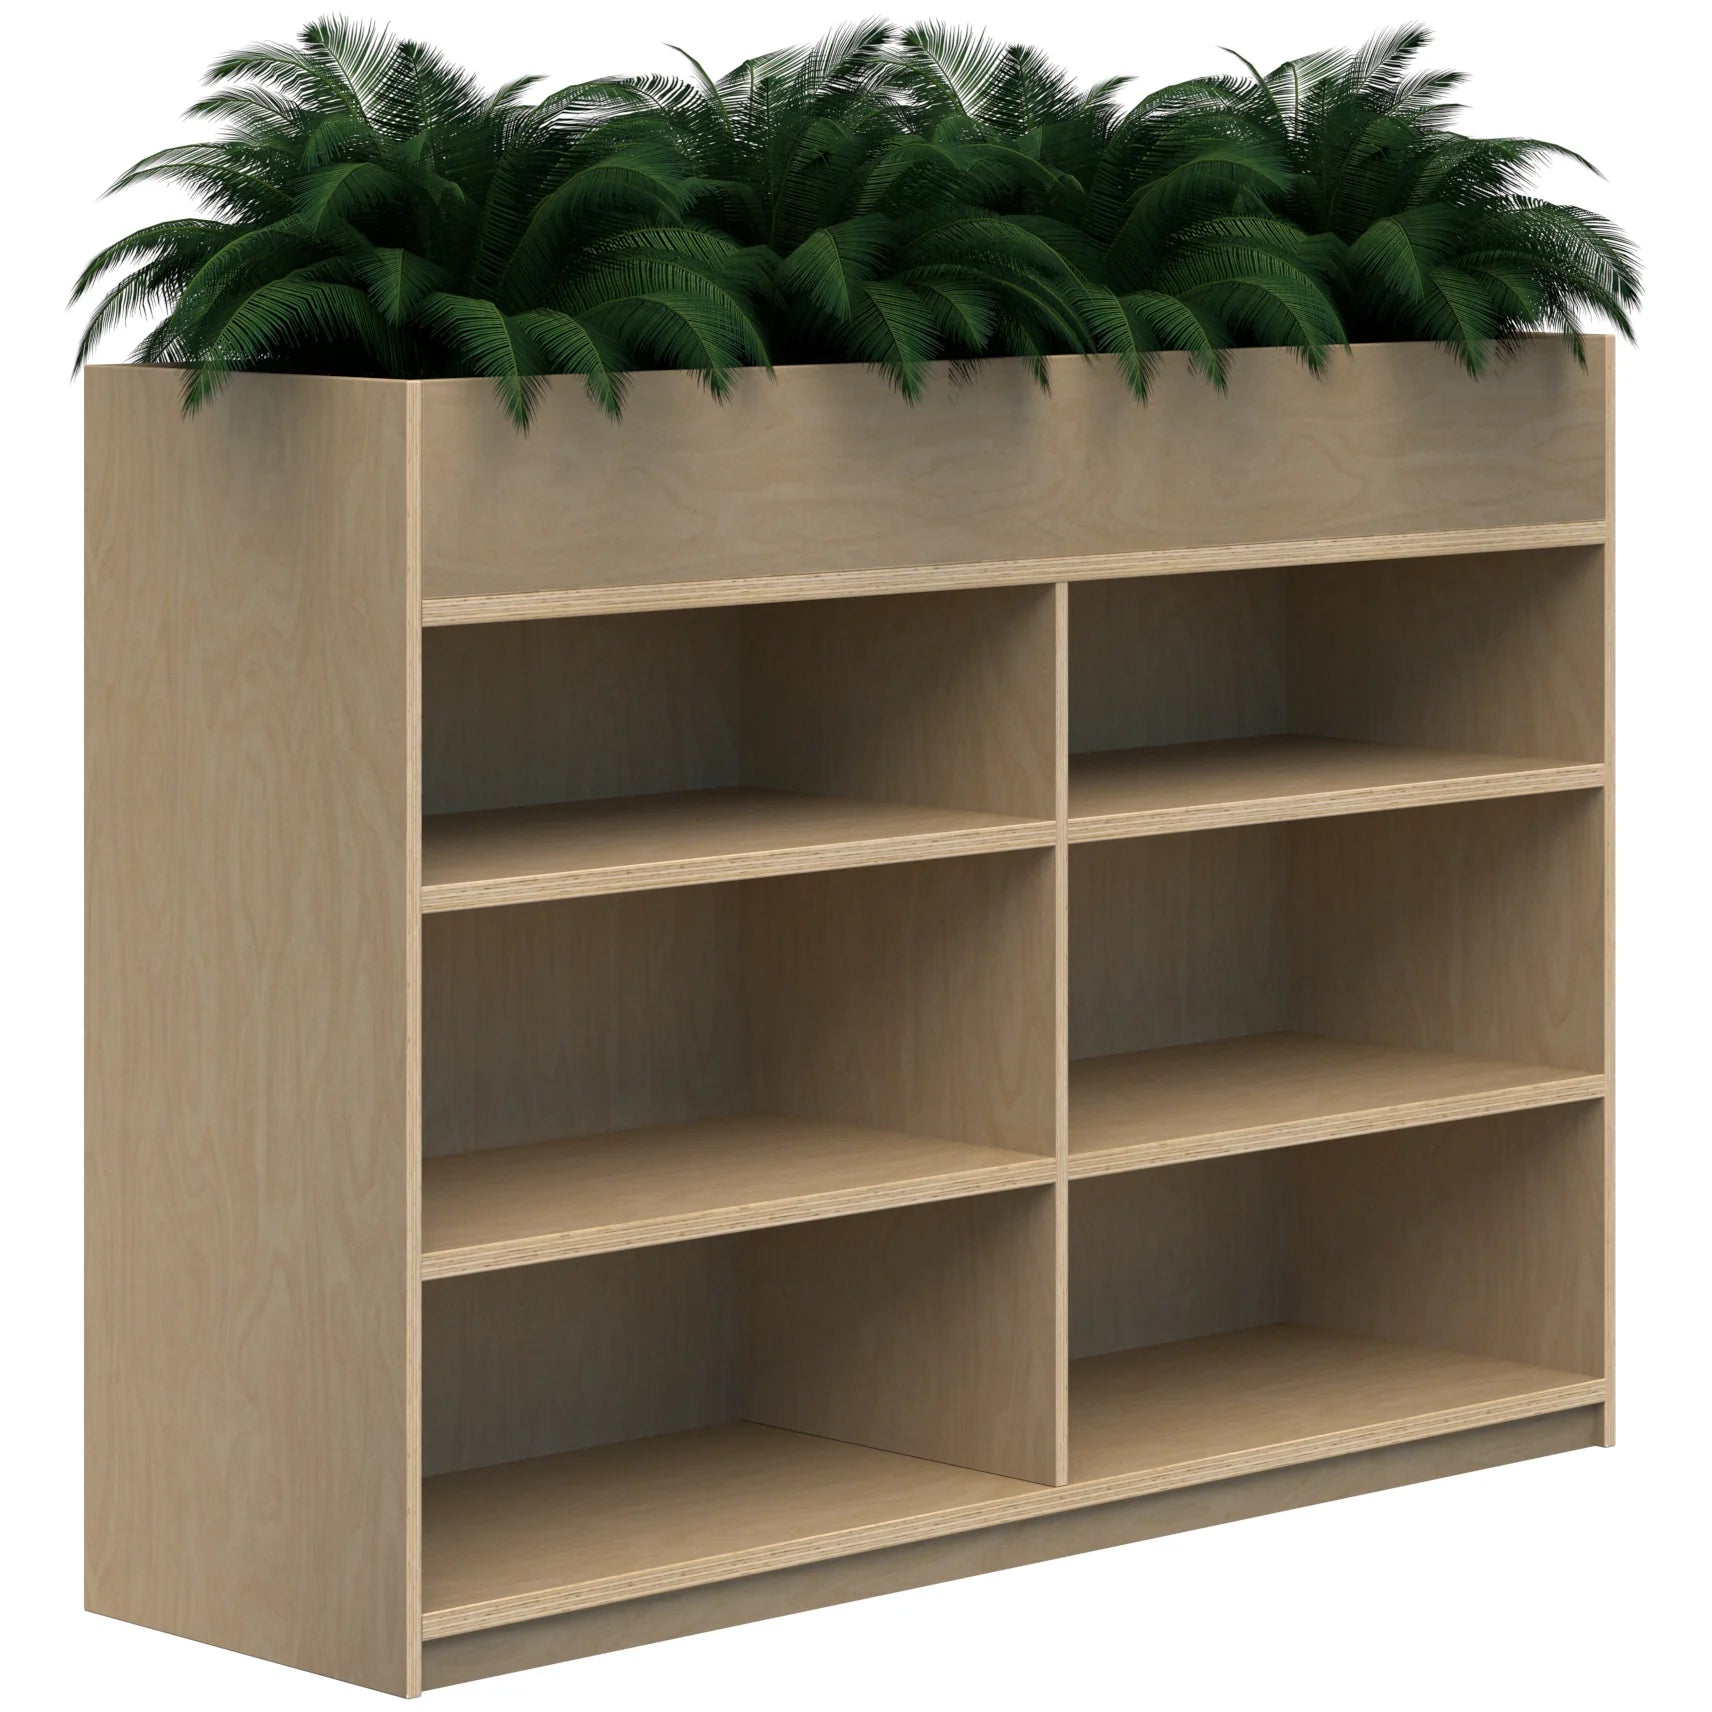 Dual three tier bookcase with built in planter box on top in raw birch colour.